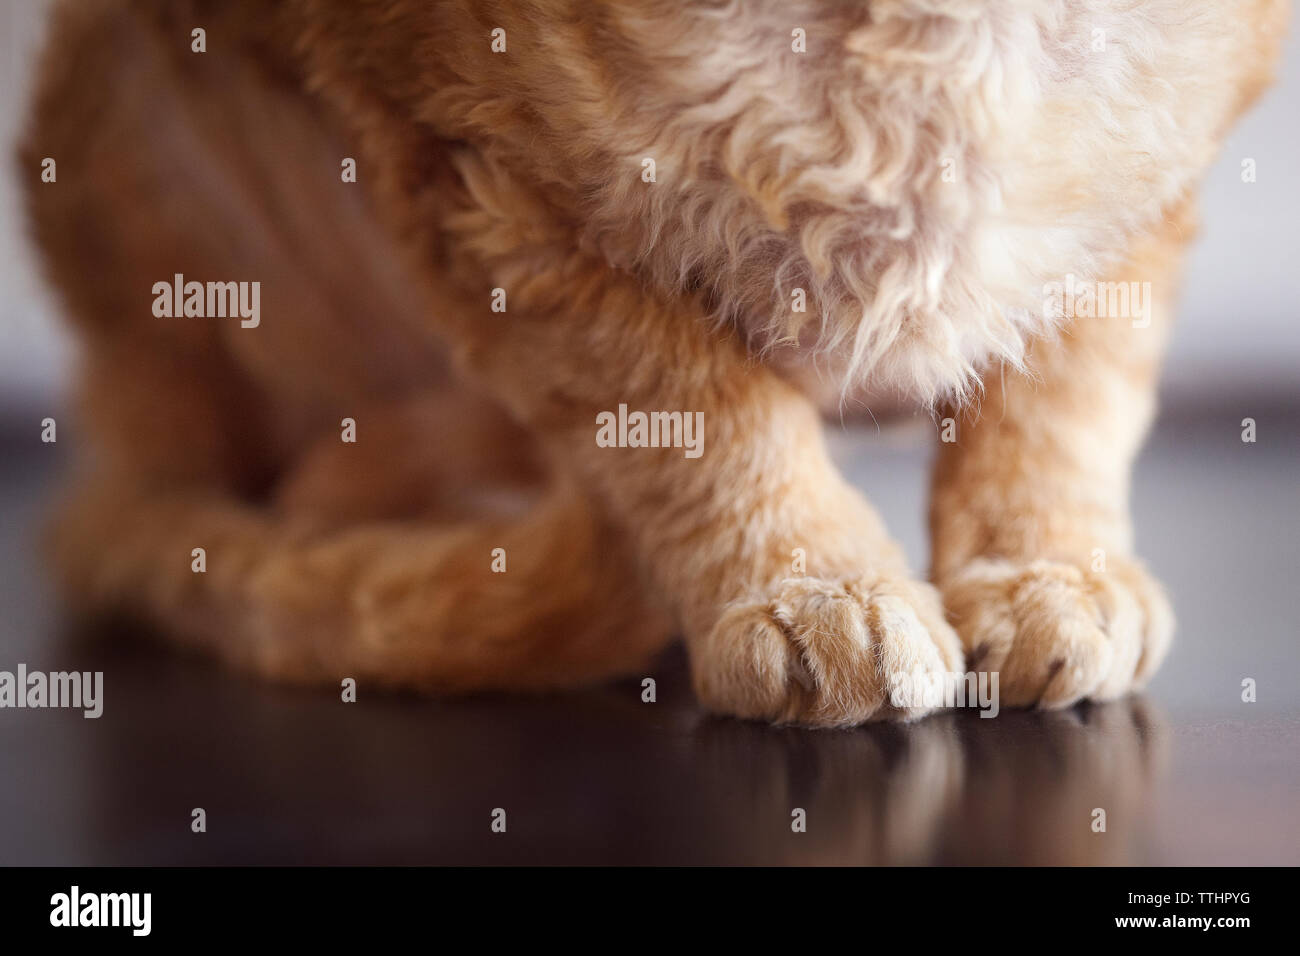 Low section of cat sitting on floor Stock Photo